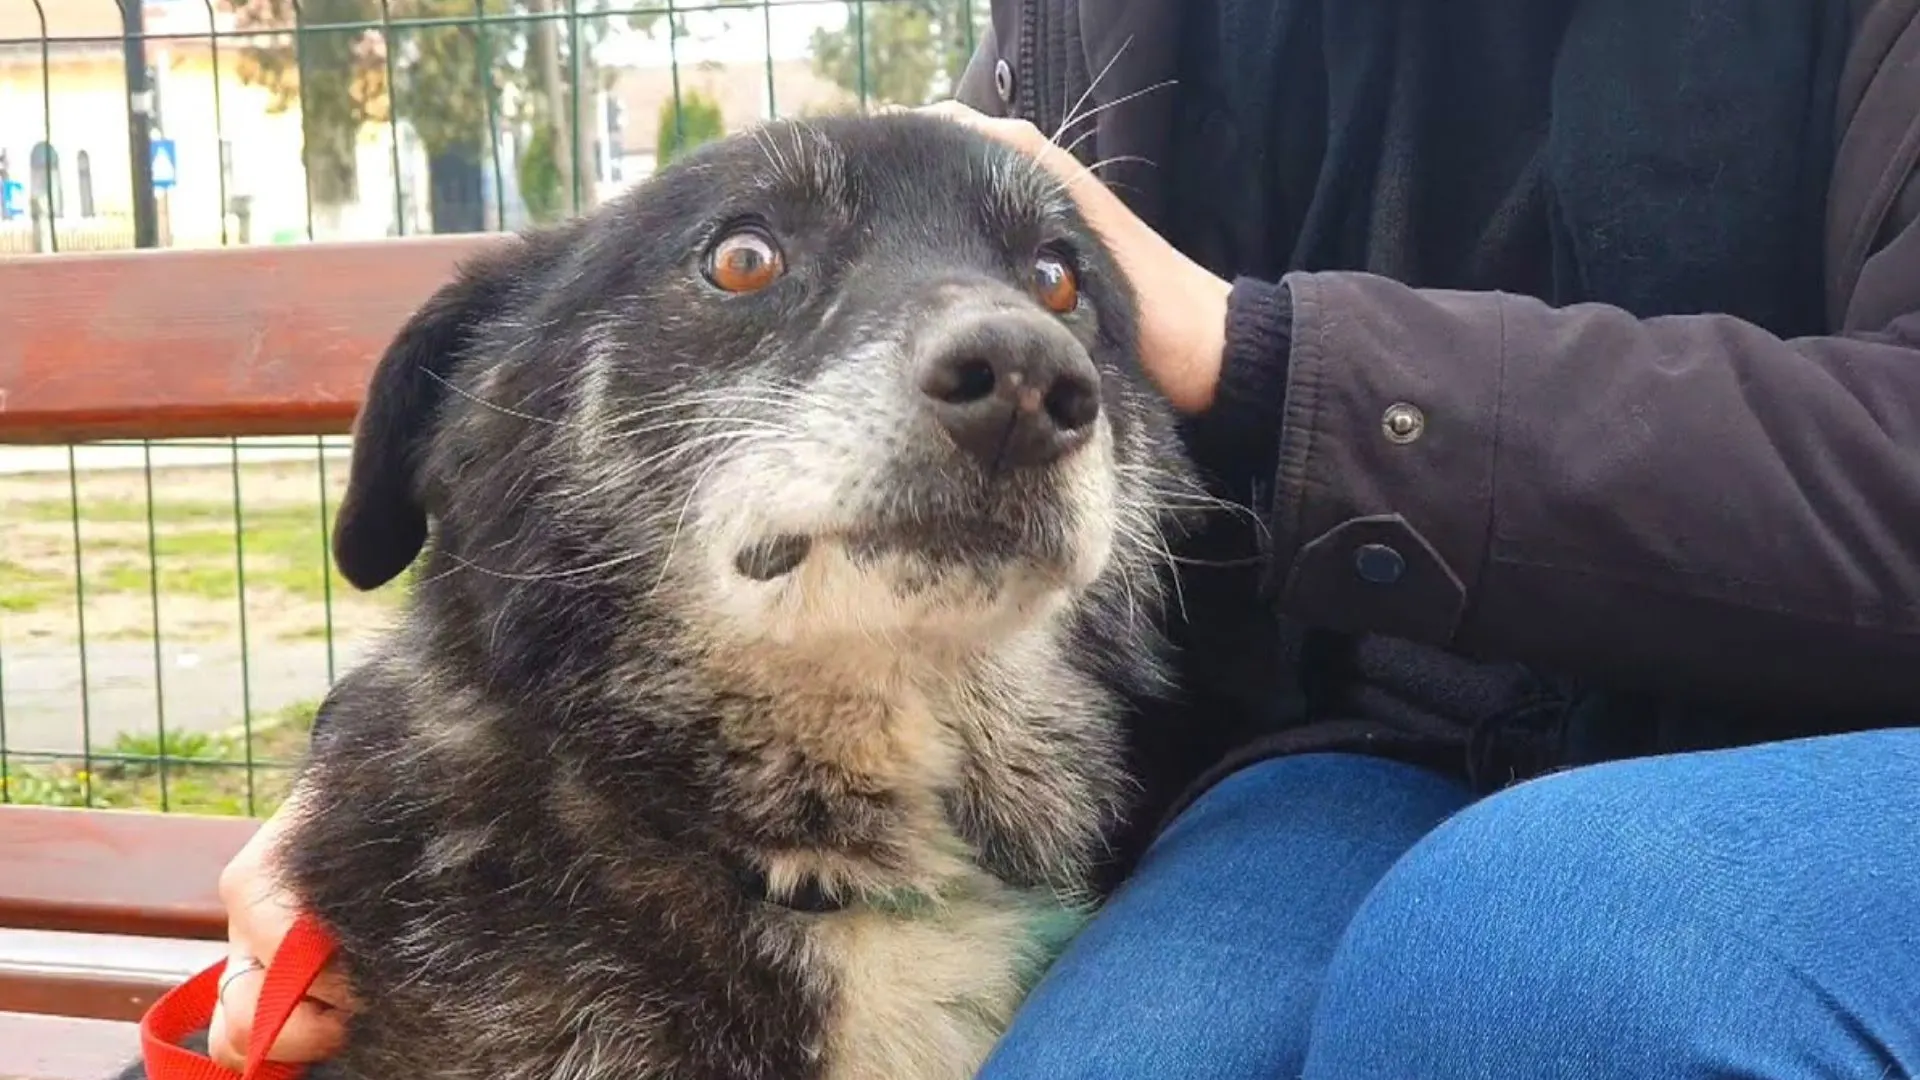 Stray Dog Spent 11 Long Years Looking For A Home To Call His Own